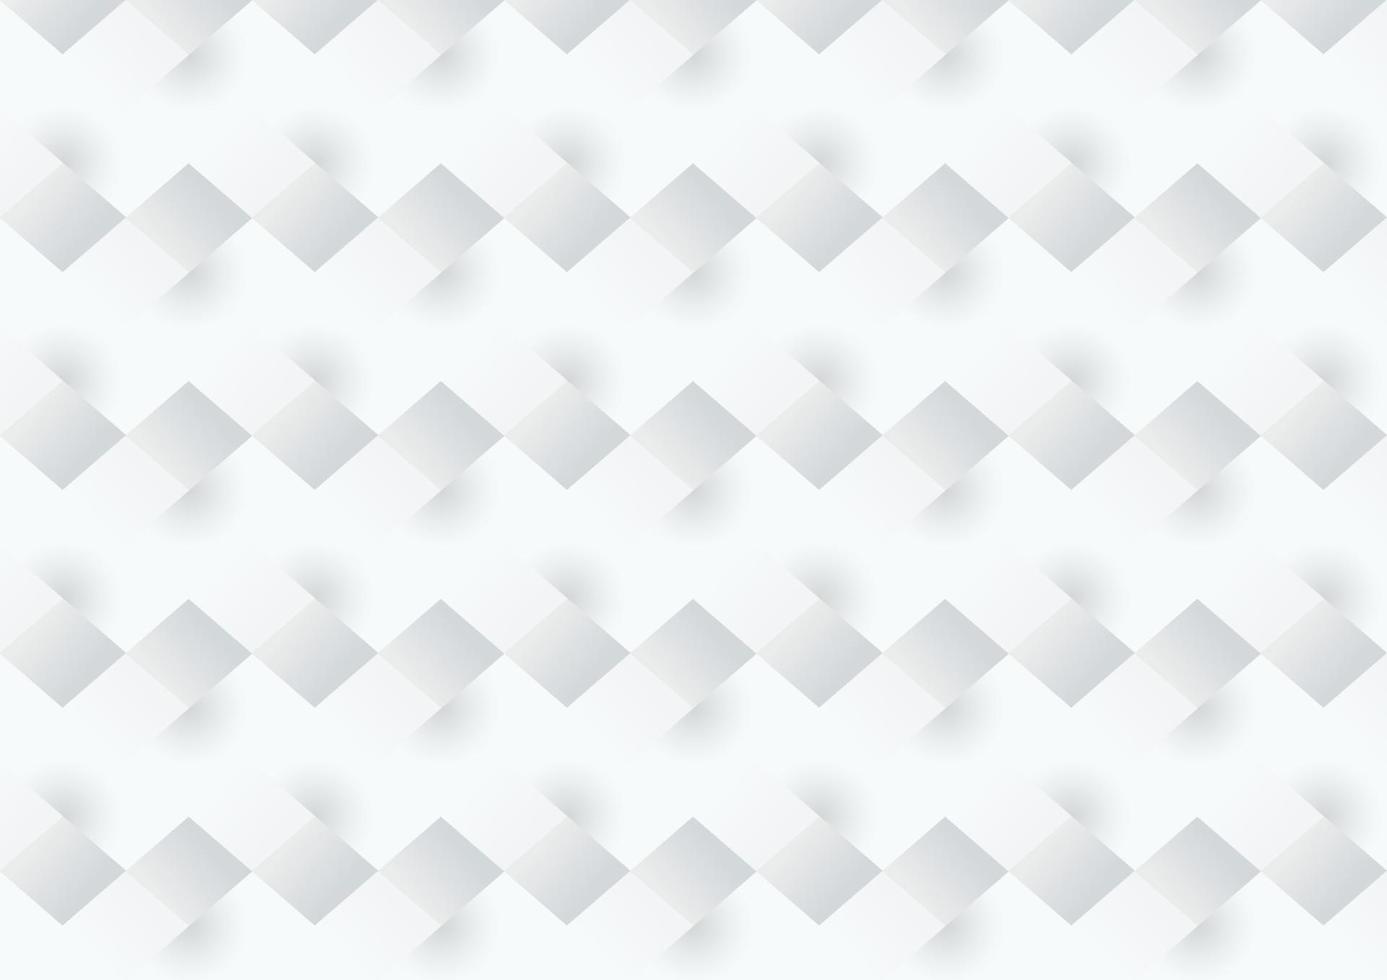 Abstract white and grey square background texture vector